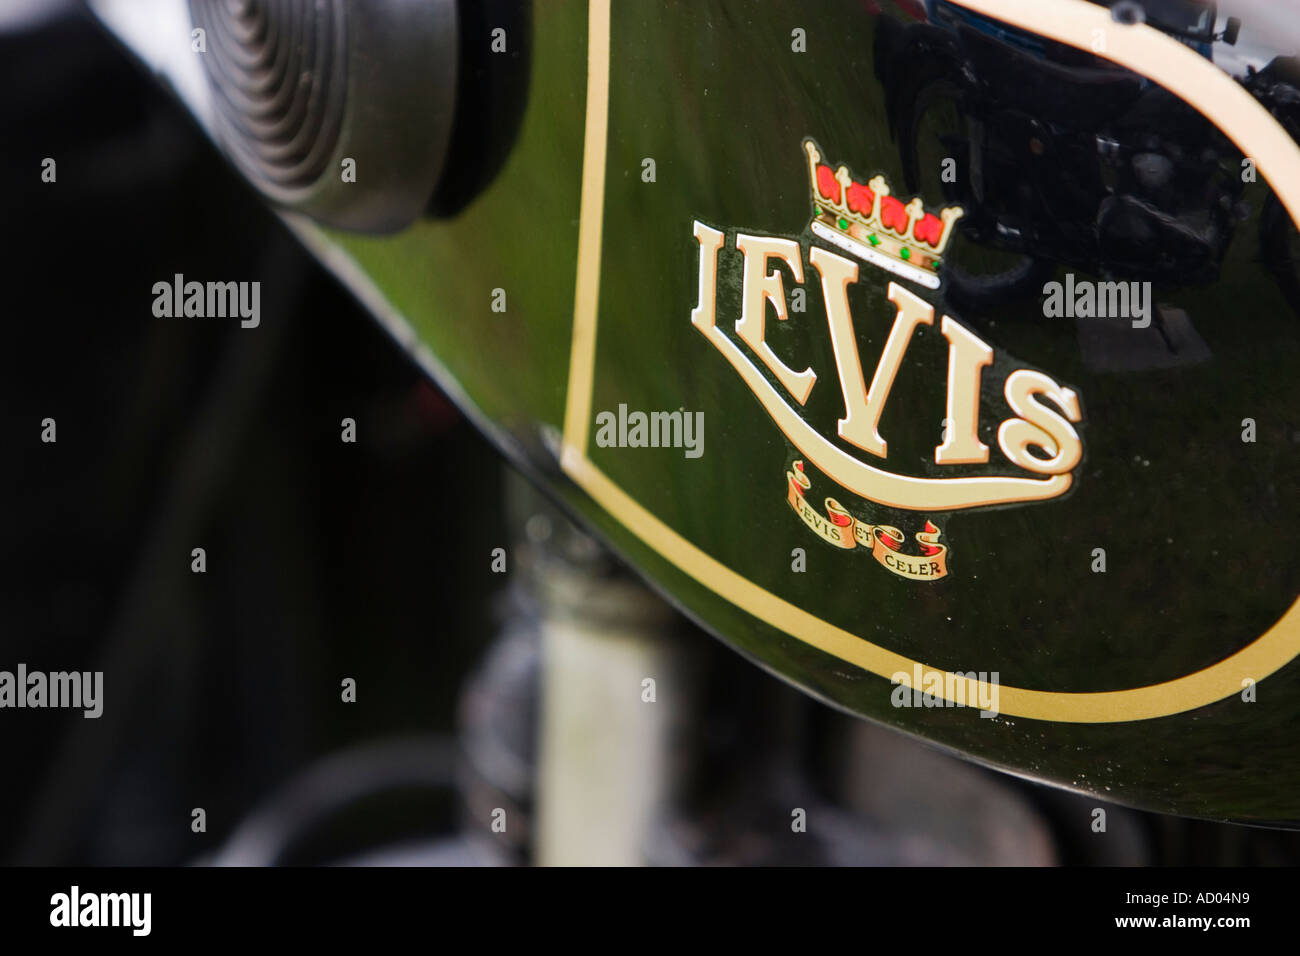 Levis motorcycle marque logo on fuel tank of antique motorbike Stock Photo  - Alamy